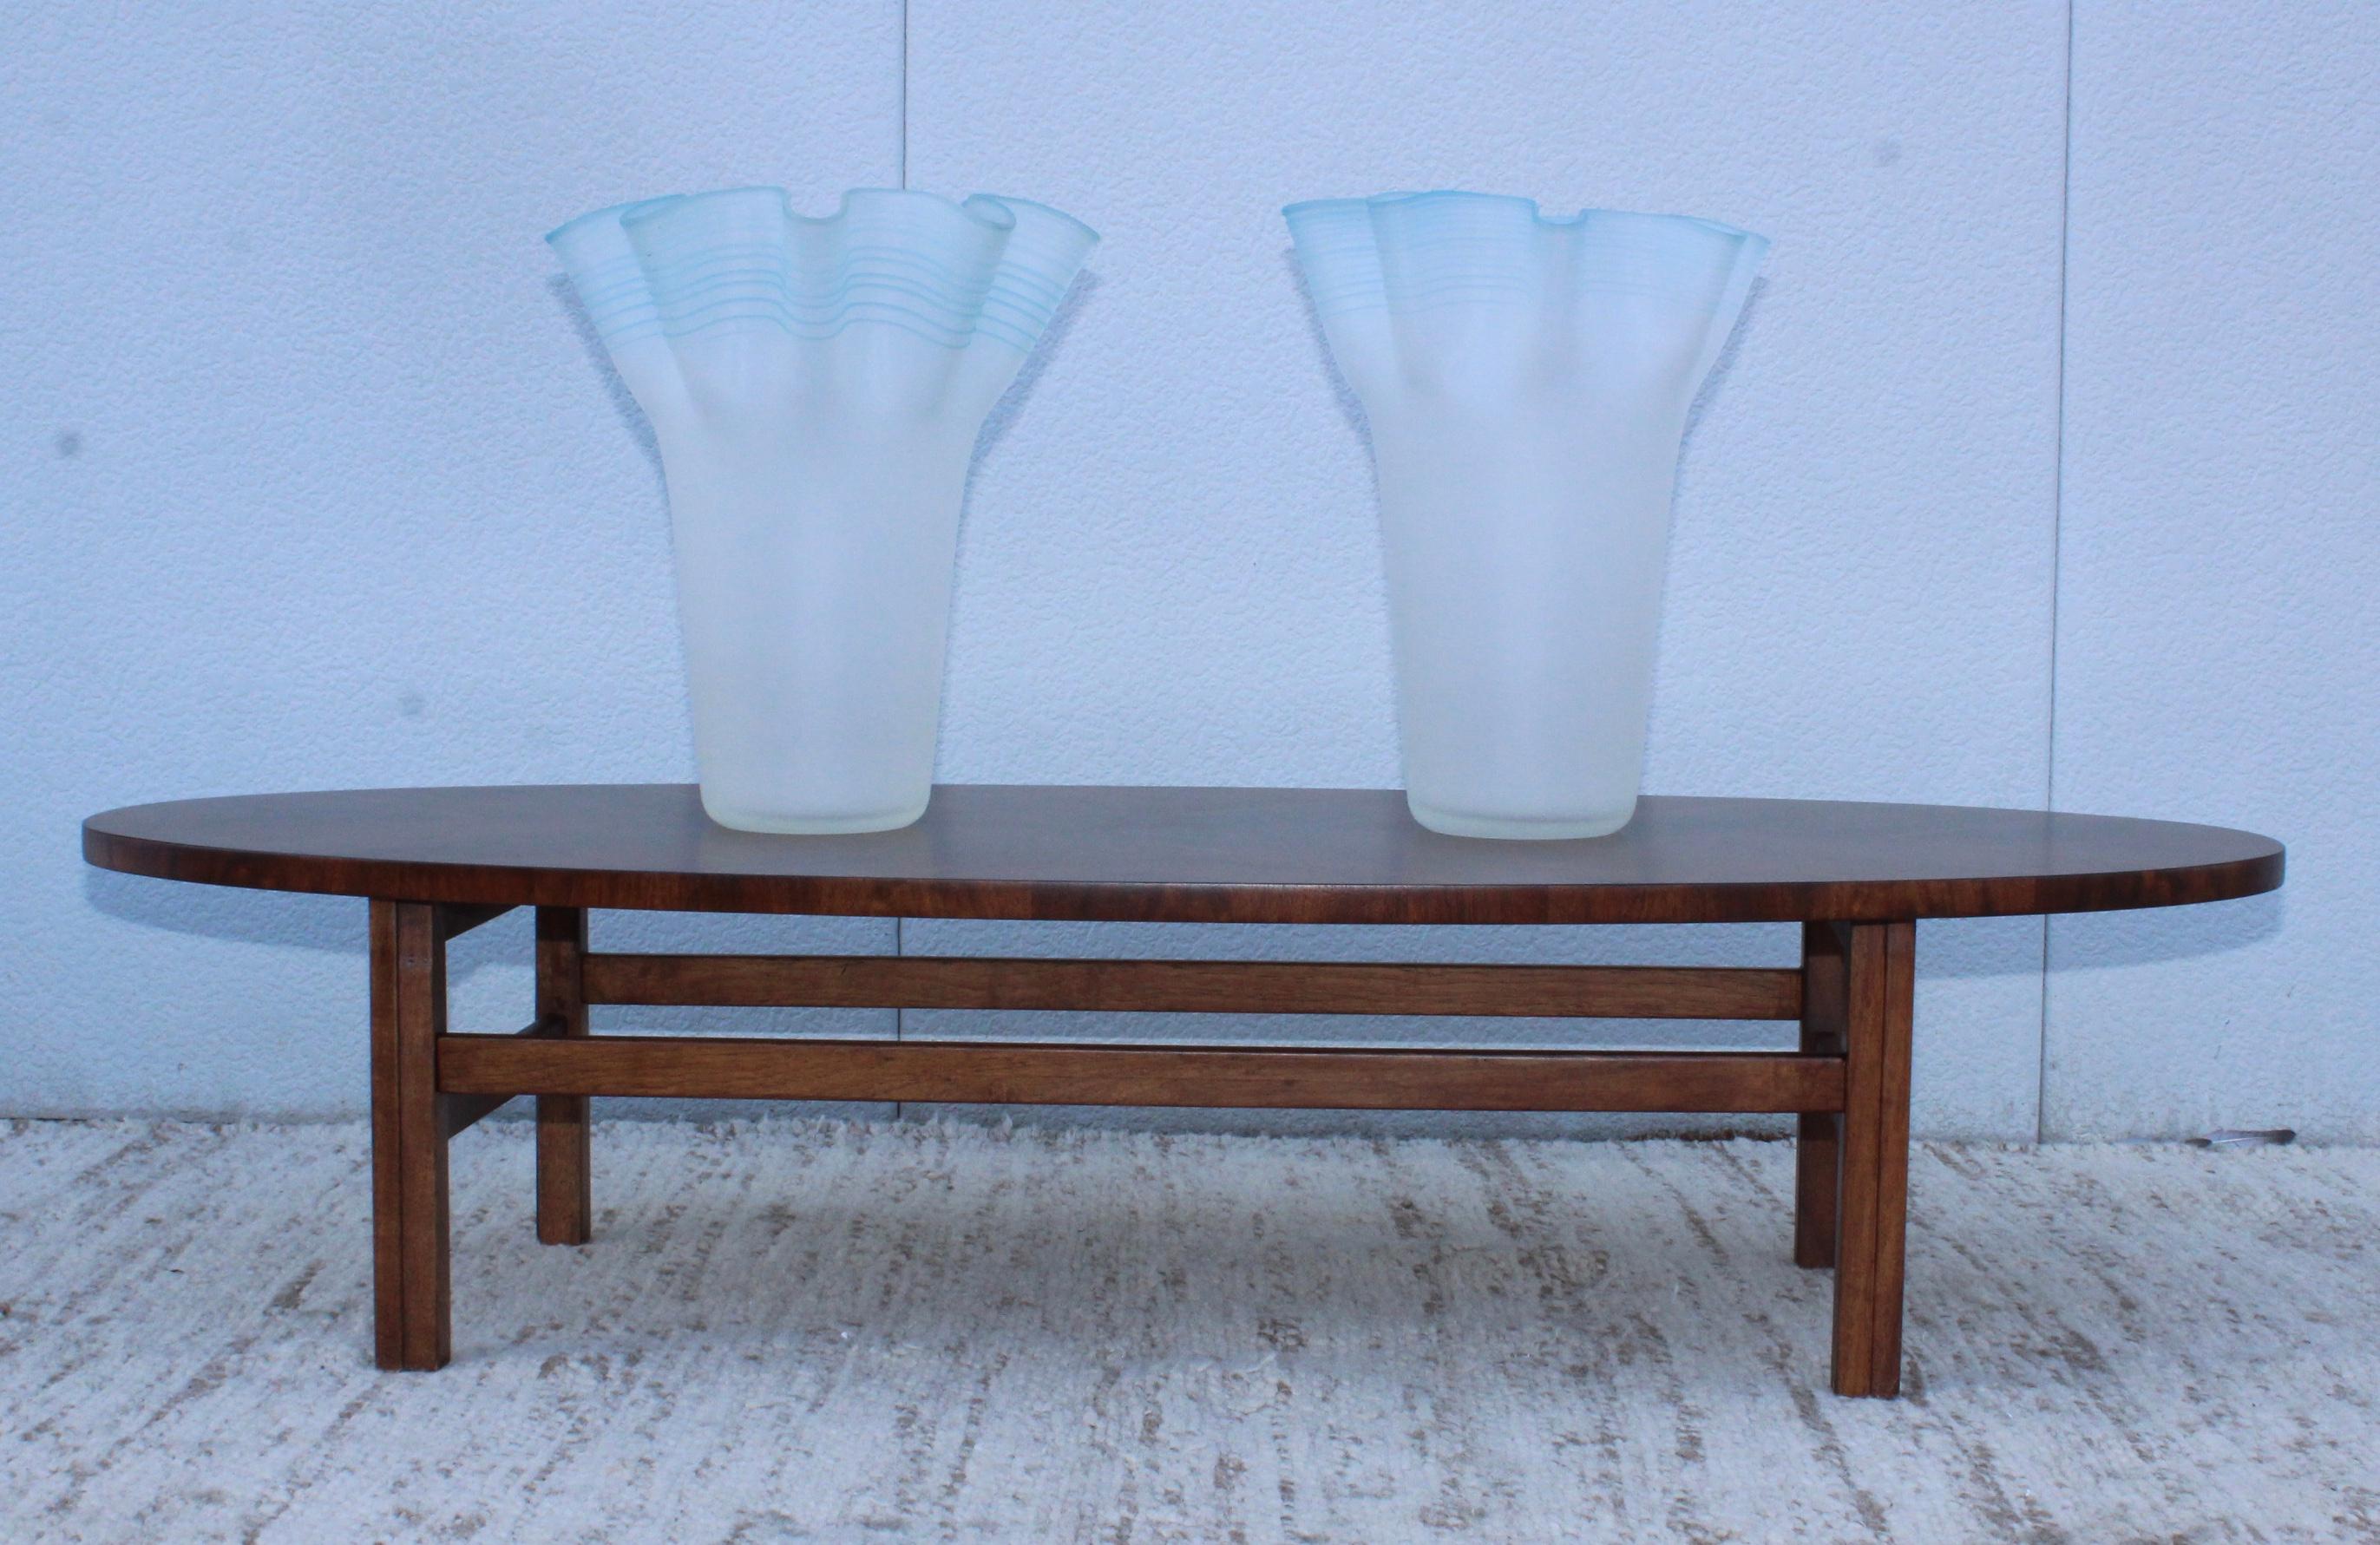 Large Frosted Glass Handkerchief Italian Vases 9